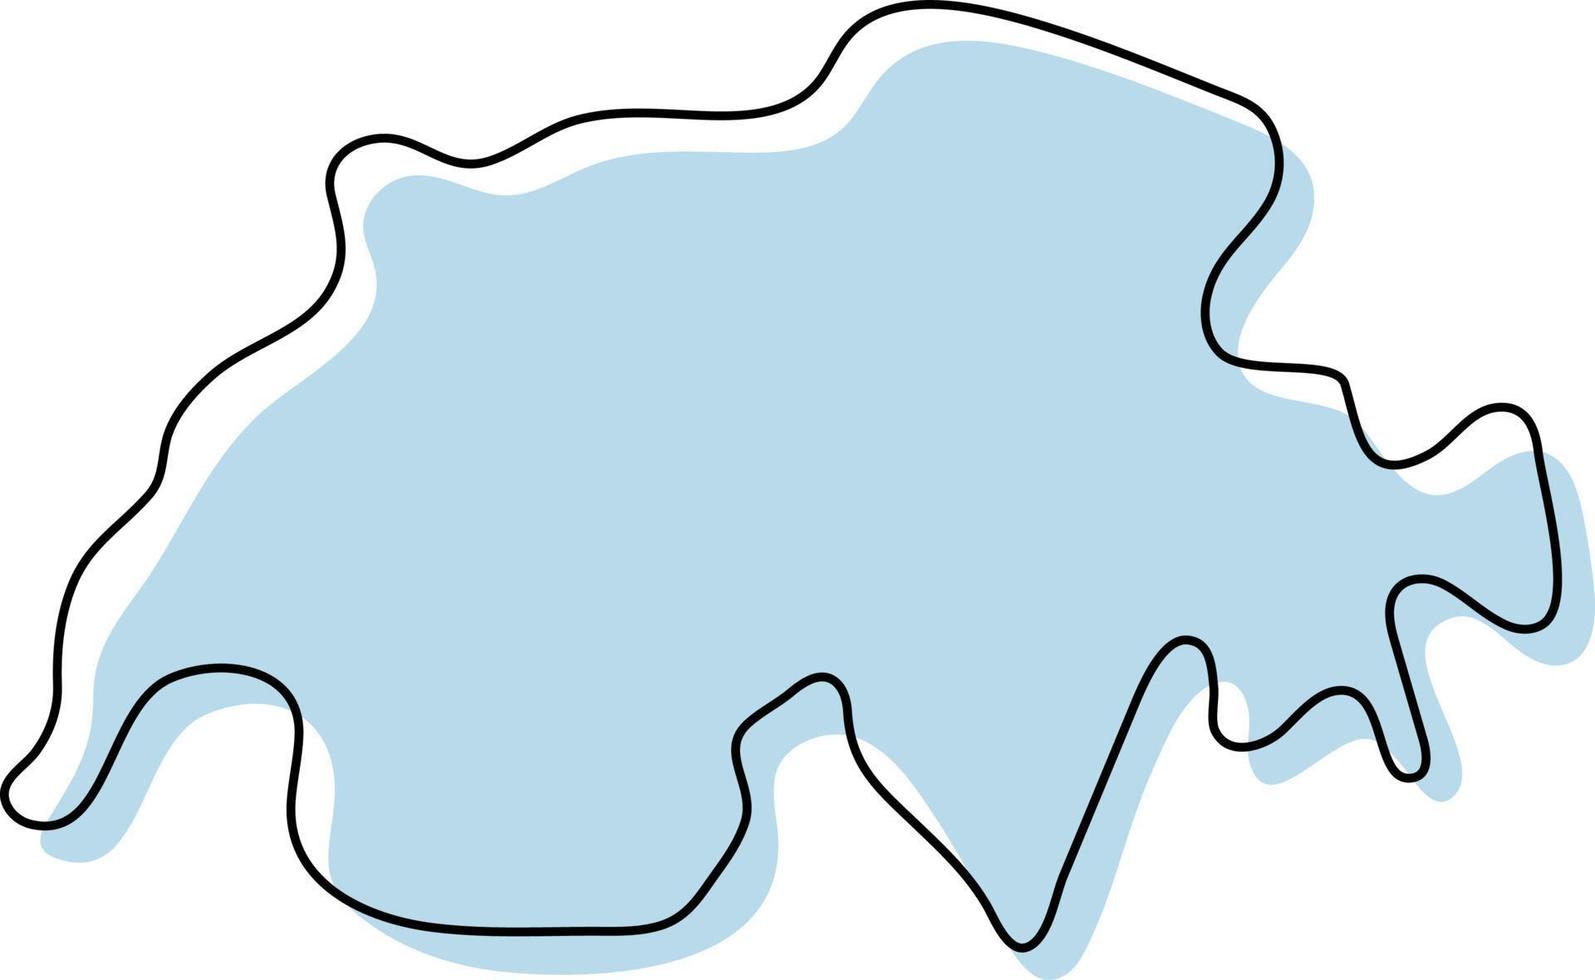 Stylized simple outline map of Switzerland icon. Blue sketch map of Switzerland vector illustration